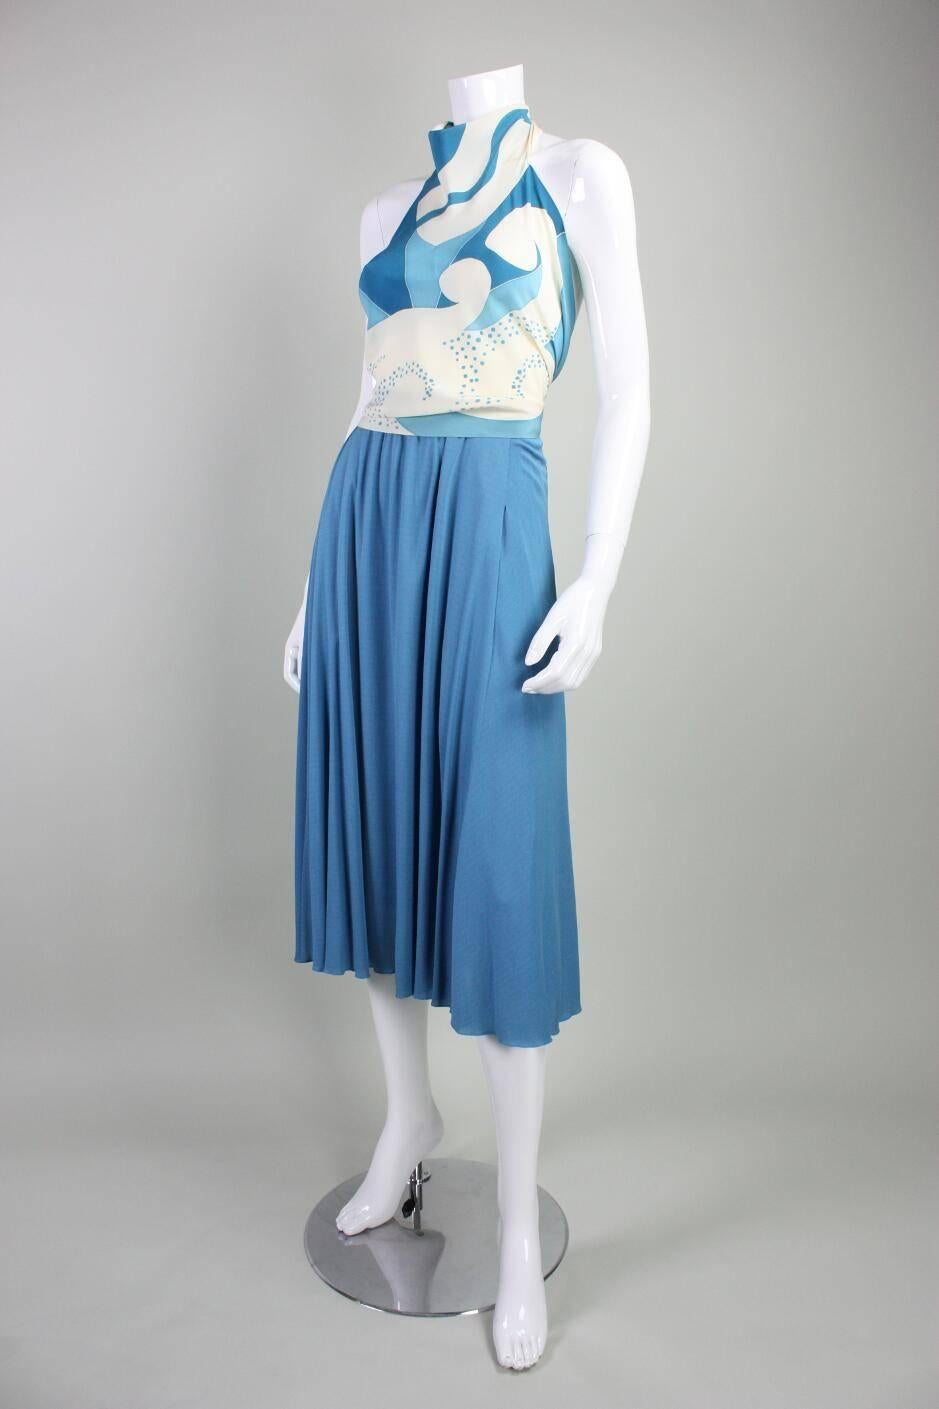 Vintage ensemble from Chloe dates to the 1970's and consists of a halter blouse and skirt.  Silk blouse features an abstract print and ties at neck and back waist. Below knee-length skirt is made of silk jersey, has zippered closure, and is lined.